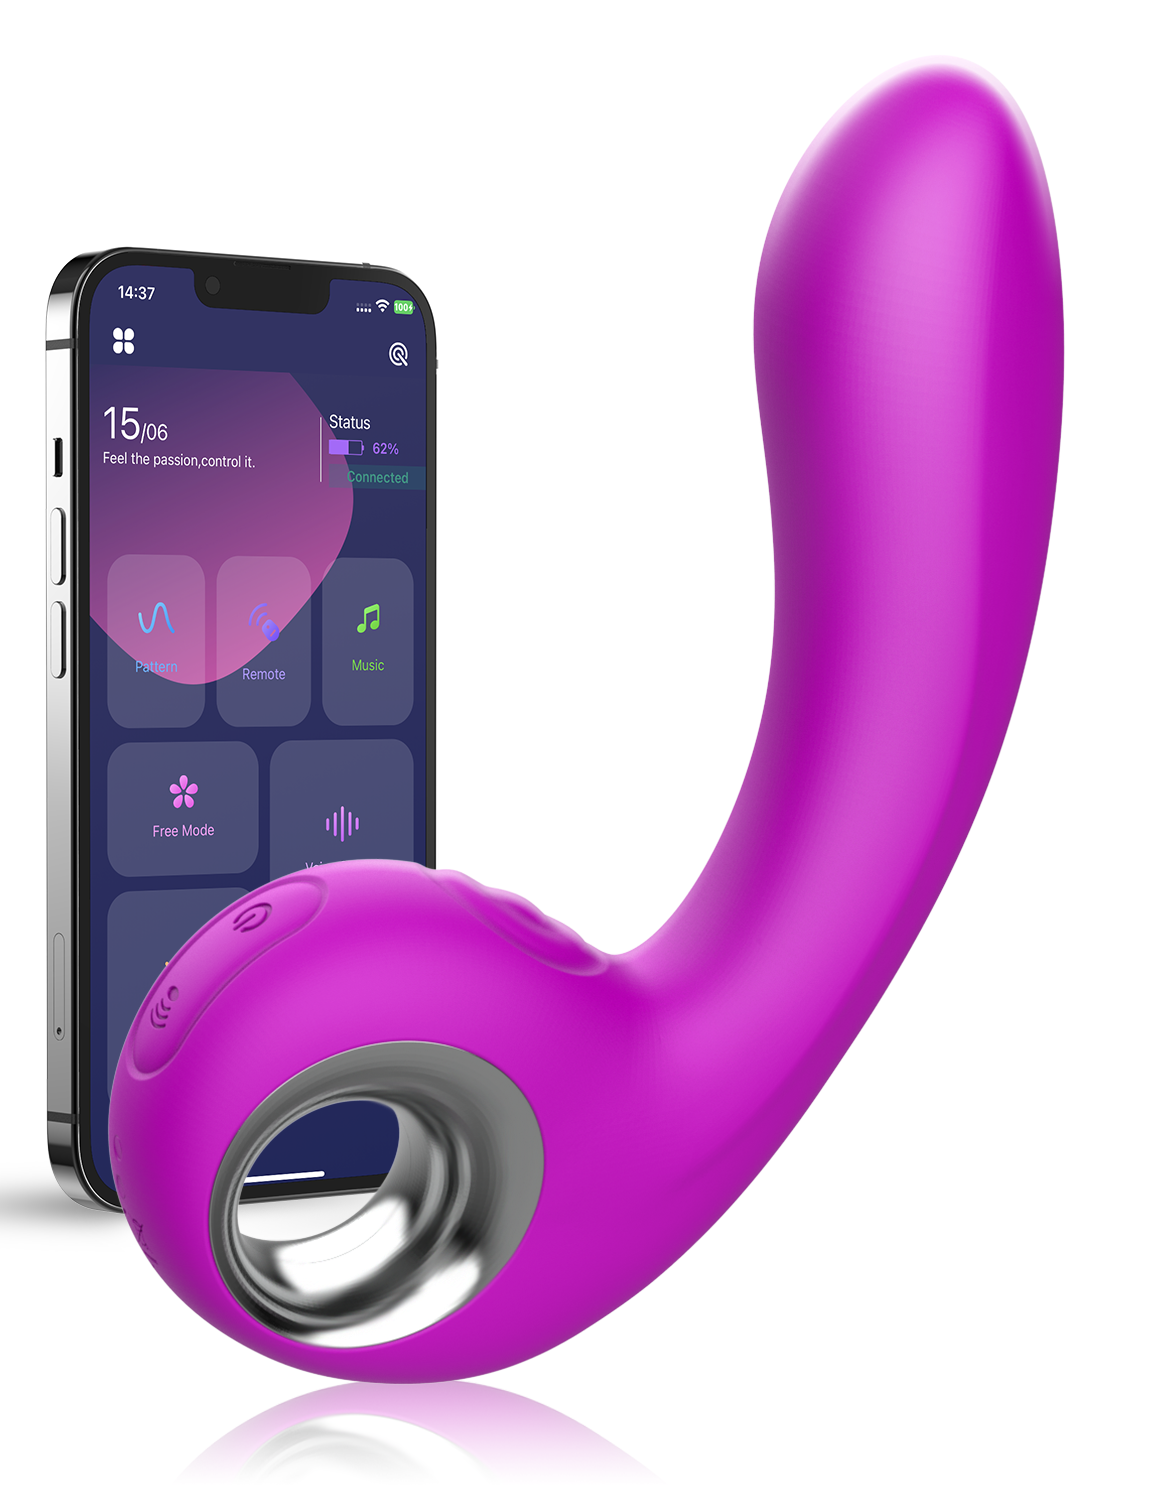 Nidalee-Purple-Double-Sided-Flapping-Rabbit-Sex-Toy-App-controlled-Vibrator-2